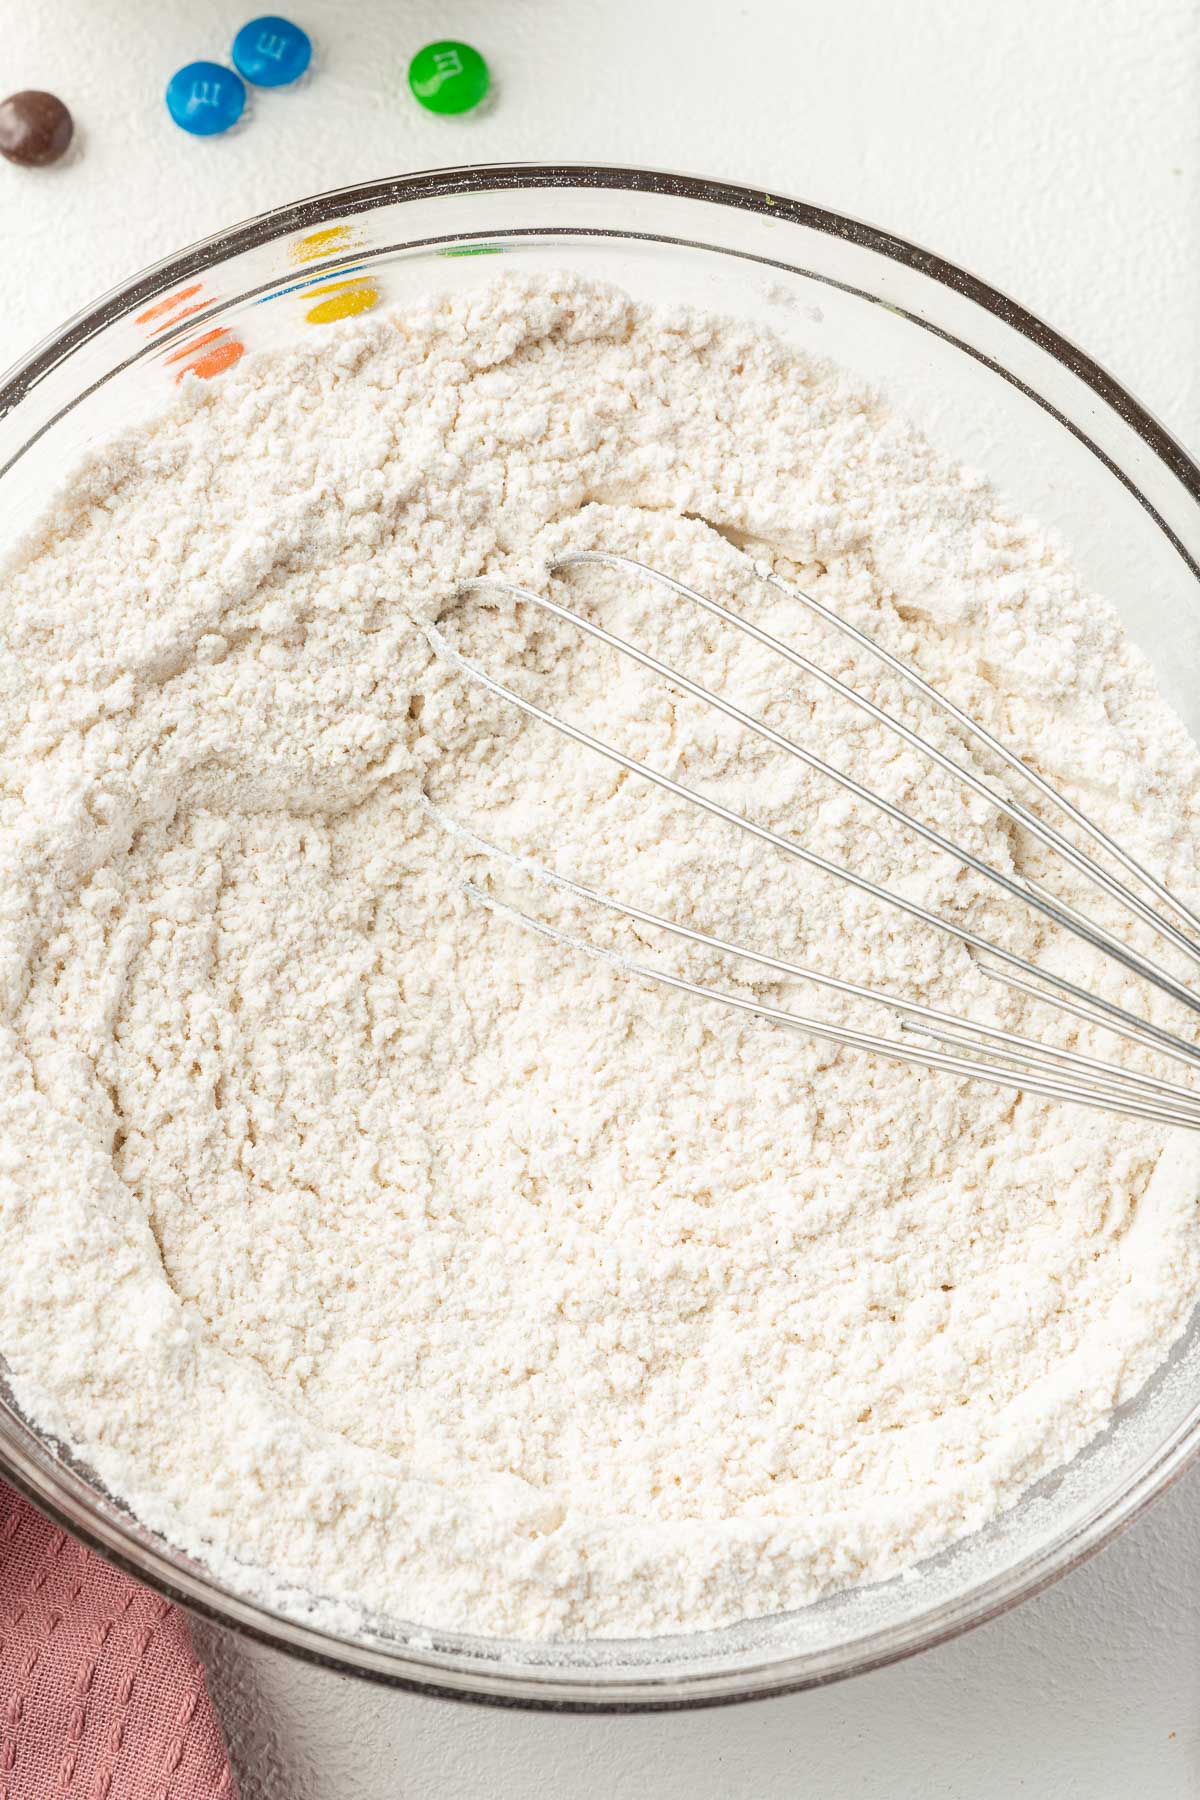 A close up of a glass mixing bowl with a gluten-free flour blend whisked together with a wire whisk.